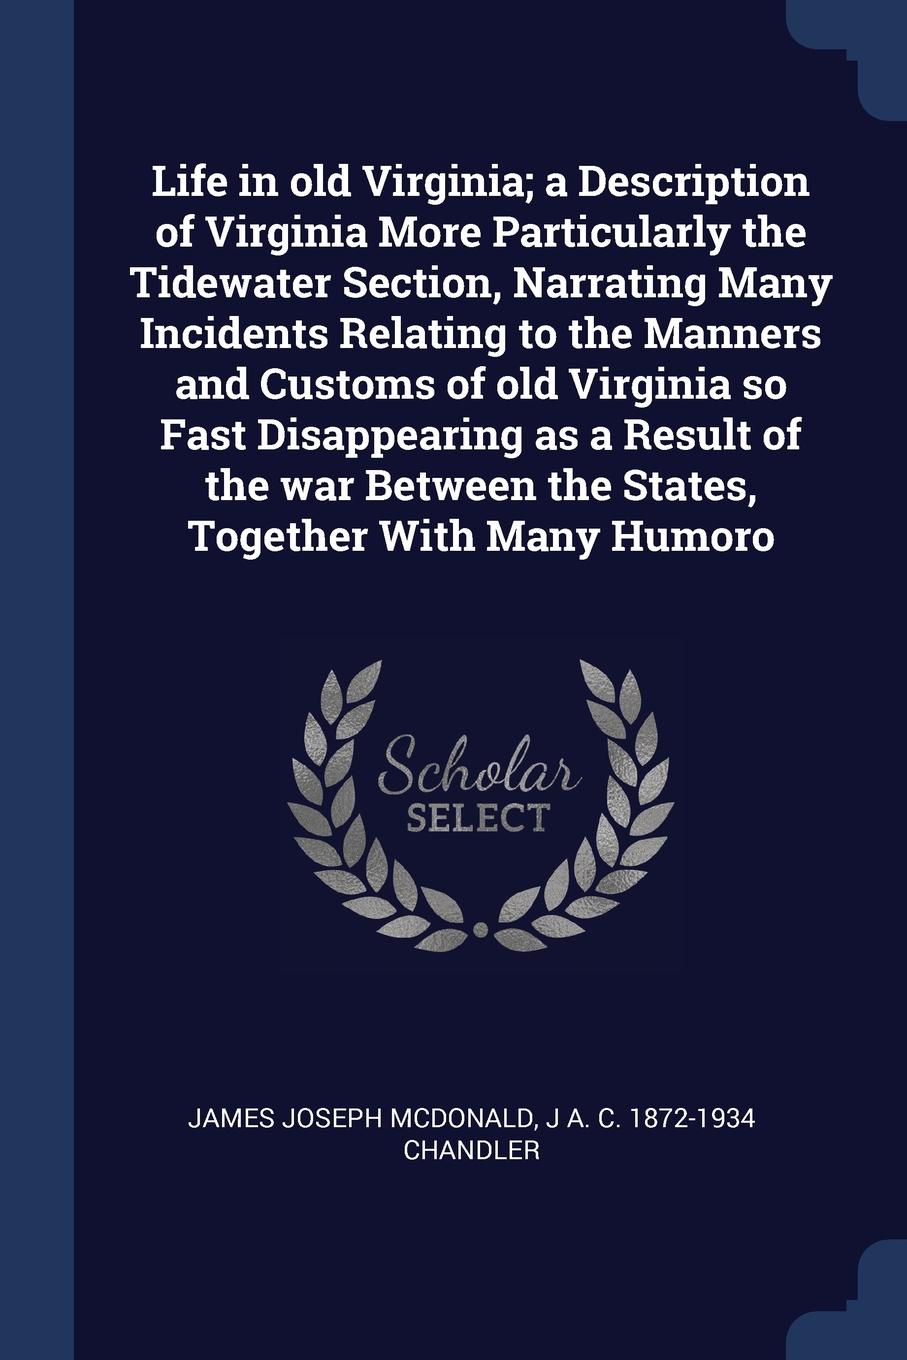 Life in old Virginia; a Description of Virginia More Particularly the Tidewater Section, Narrating Many Incidents Relating to the Manners and Customs of old Virginia so Fast Disappearing as a Result of the war Between the States, Together With Man...